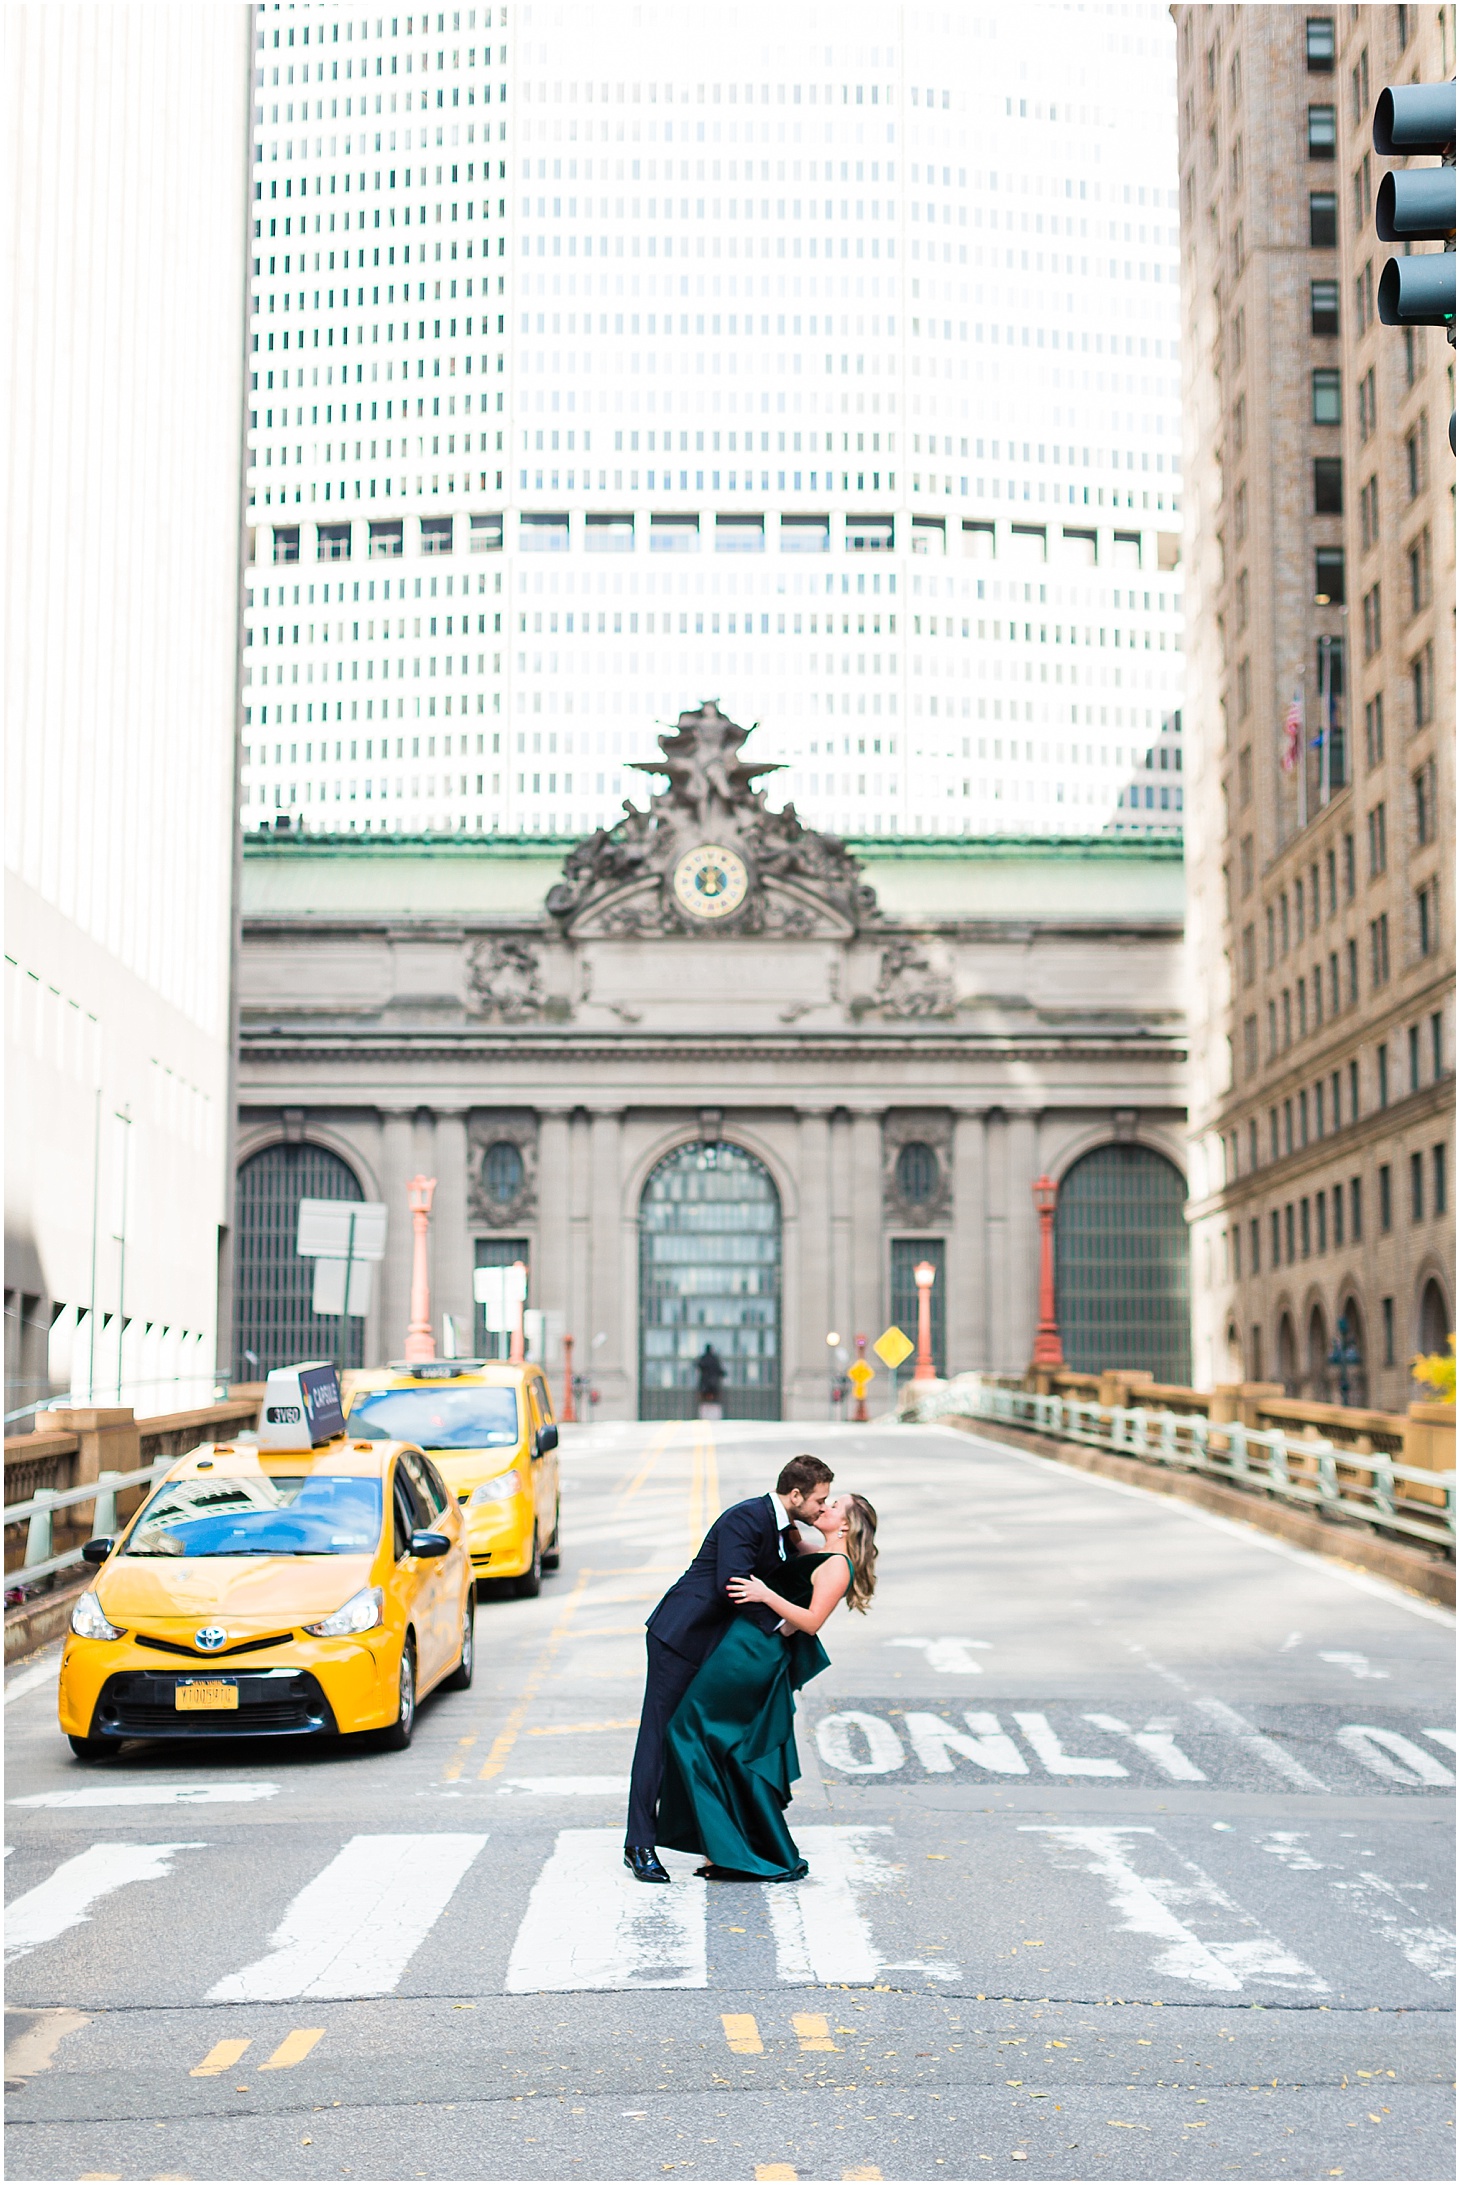 Engagement Portraits in New York City | Sunrise Engagement at the Brooklyn Bridge, Top of Rock, and Grand Central Station | Sarah Bradshaw Photography